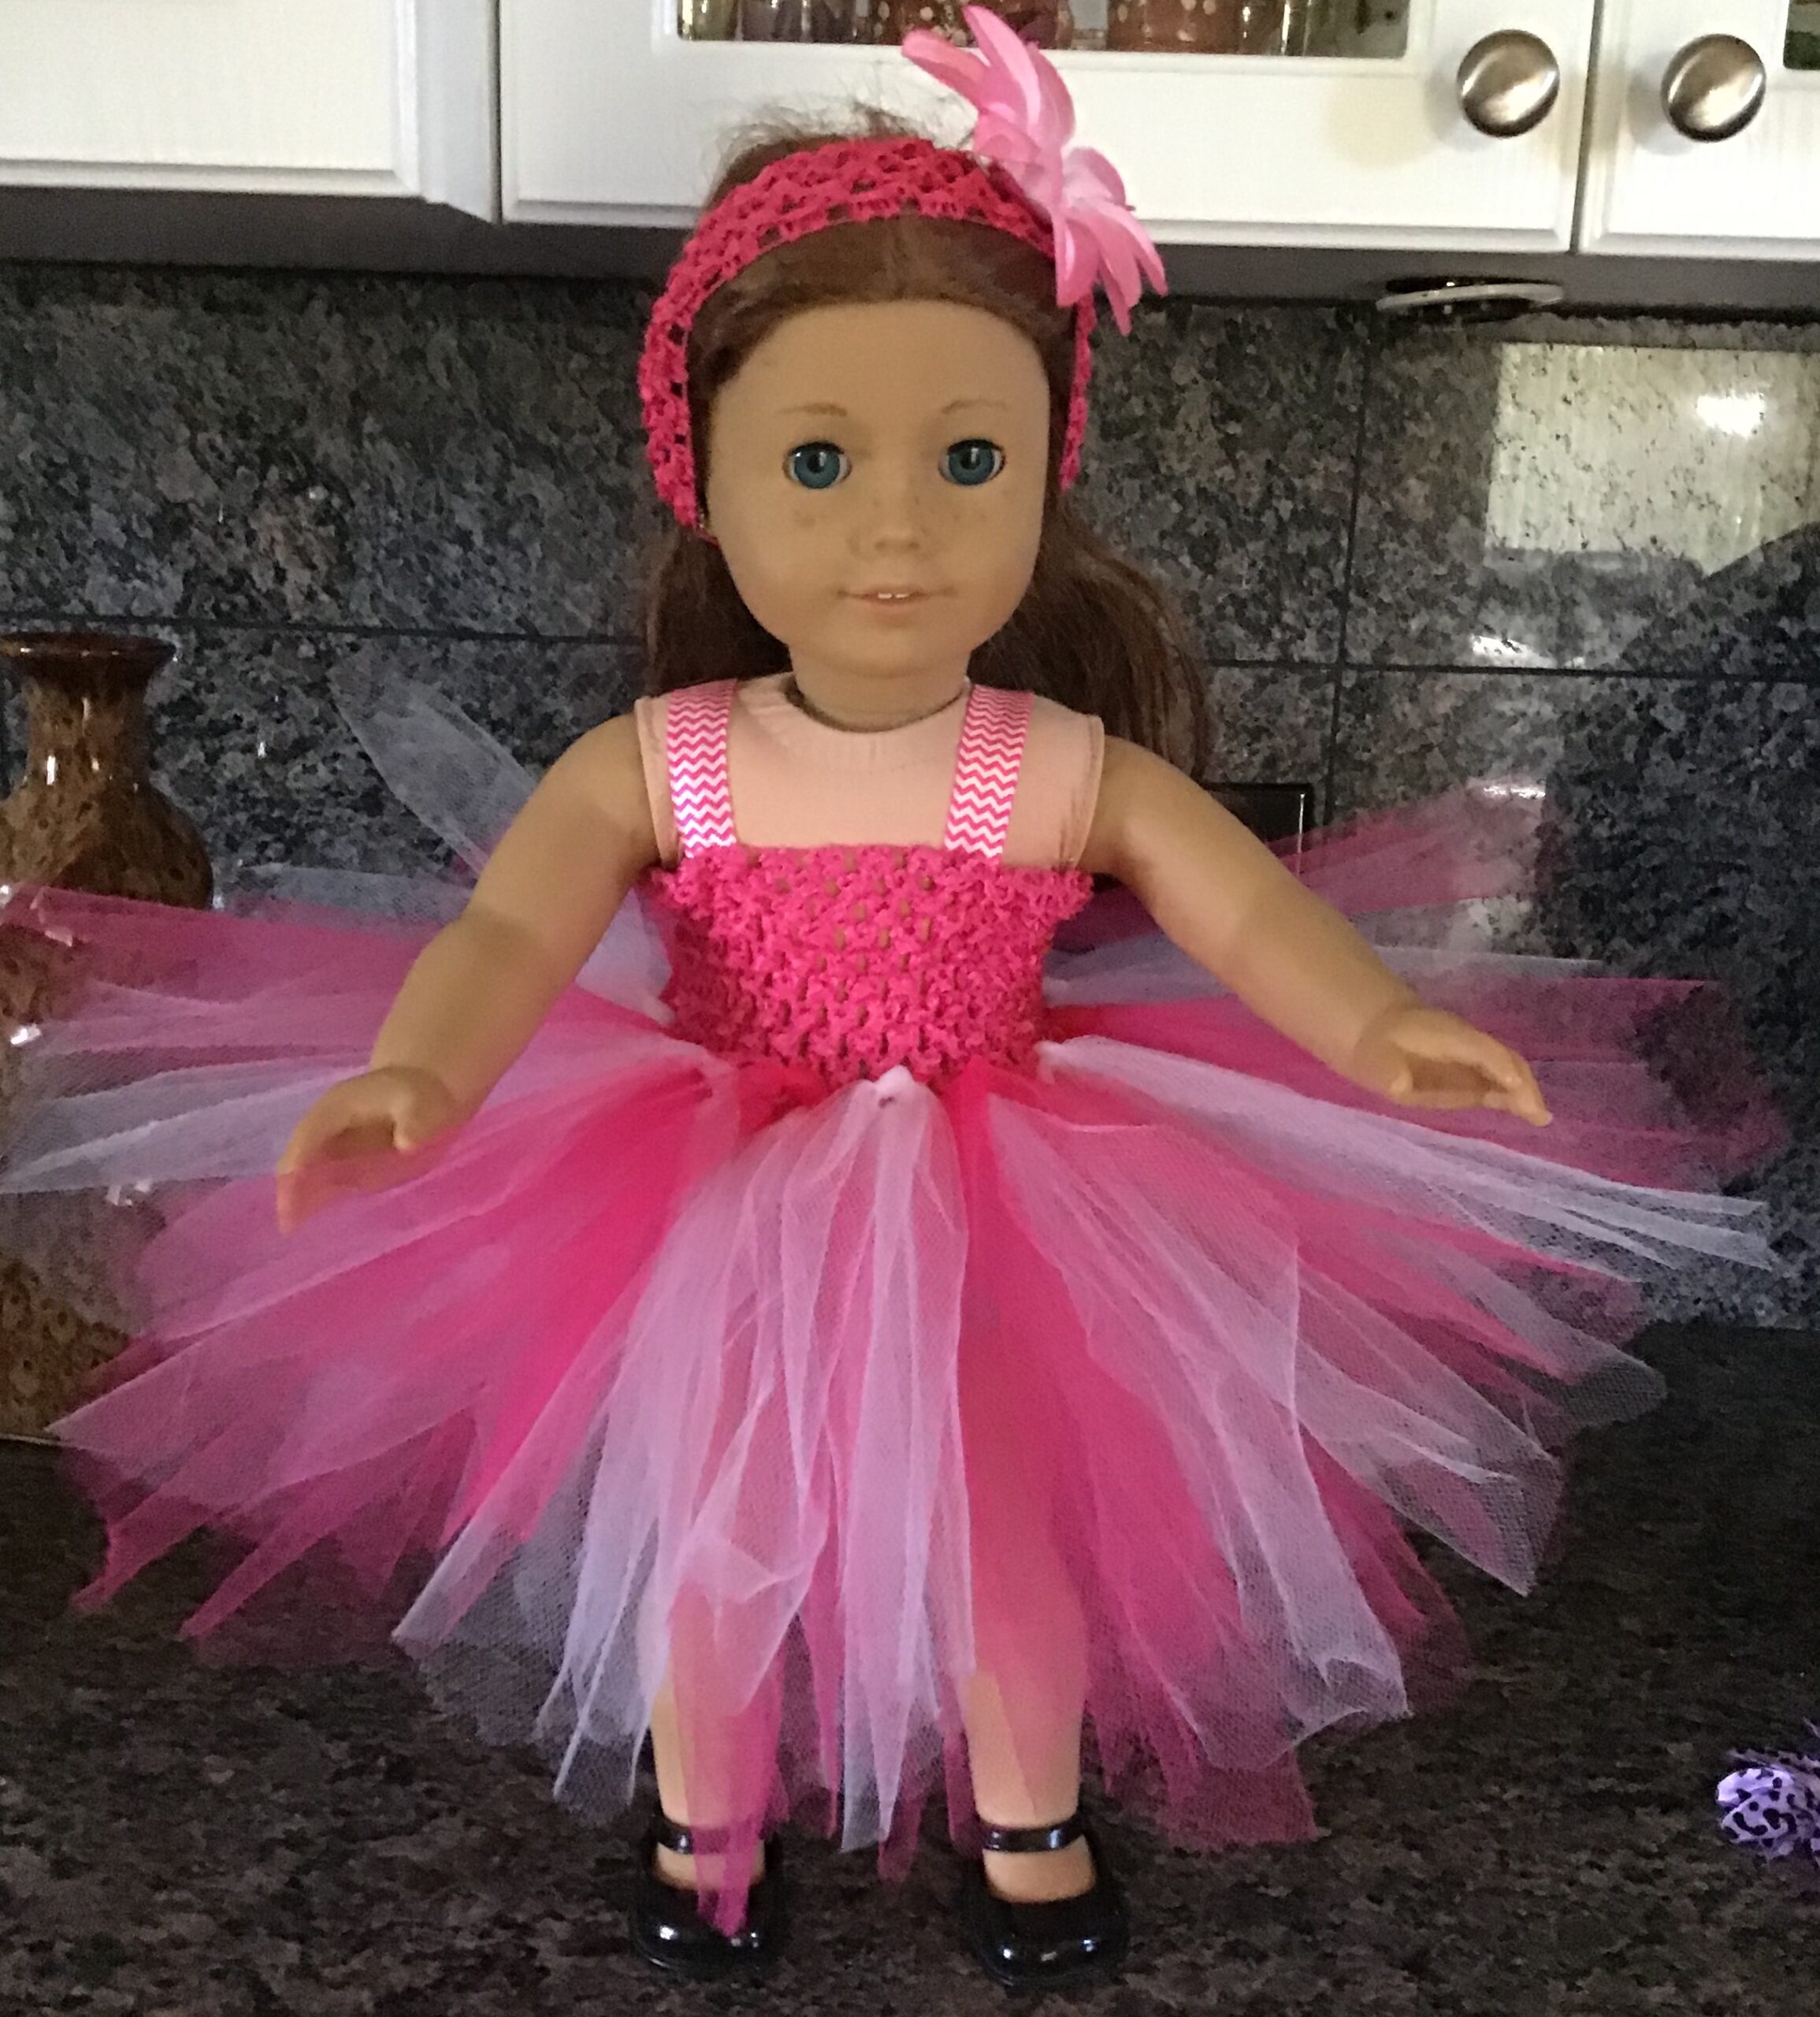 Doll wearing extremely pink and fluffy dress with headband and bow. Doll clothing can be found at The Greater Rochester Heritage Days Festival.